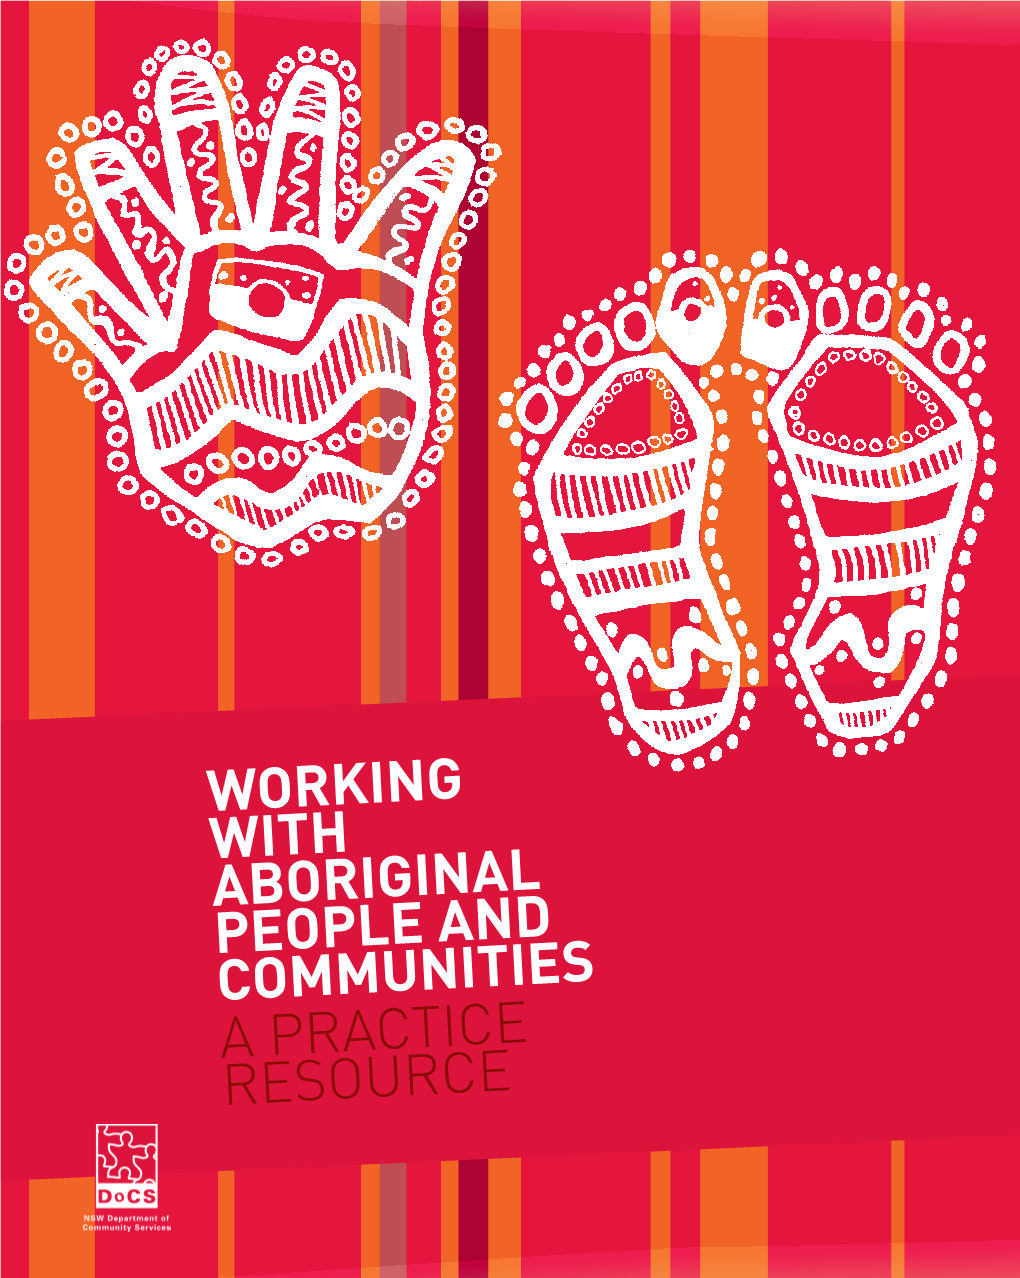 Working with Aboriginal People and Communities